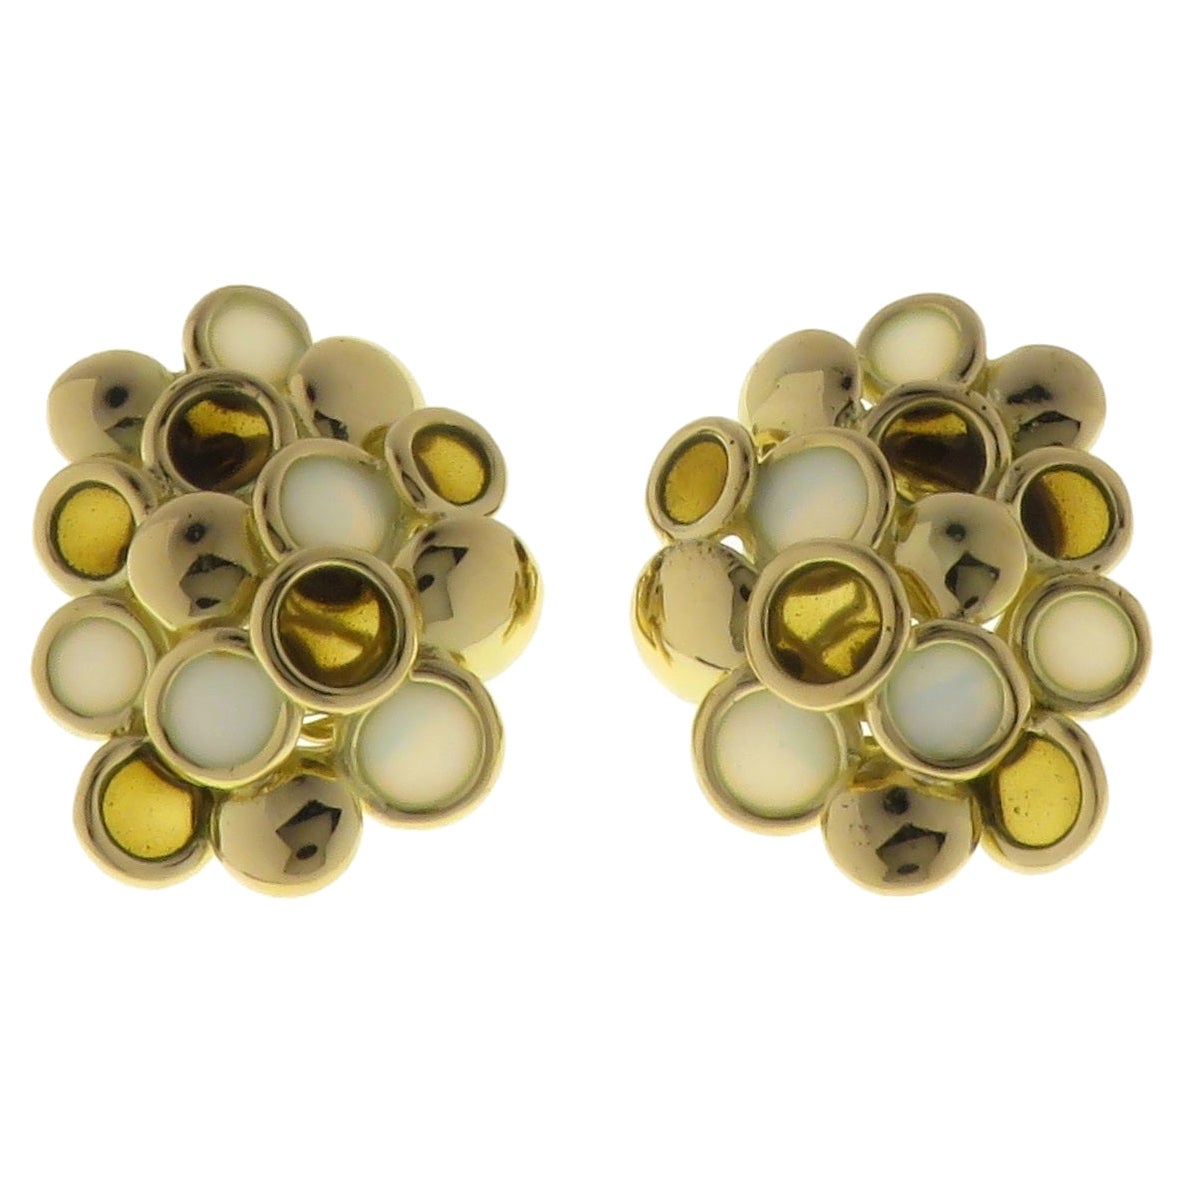 Vintage Brown & White Enamel 18 Karat Yellow Gold Clip on Earrings Made in Italy